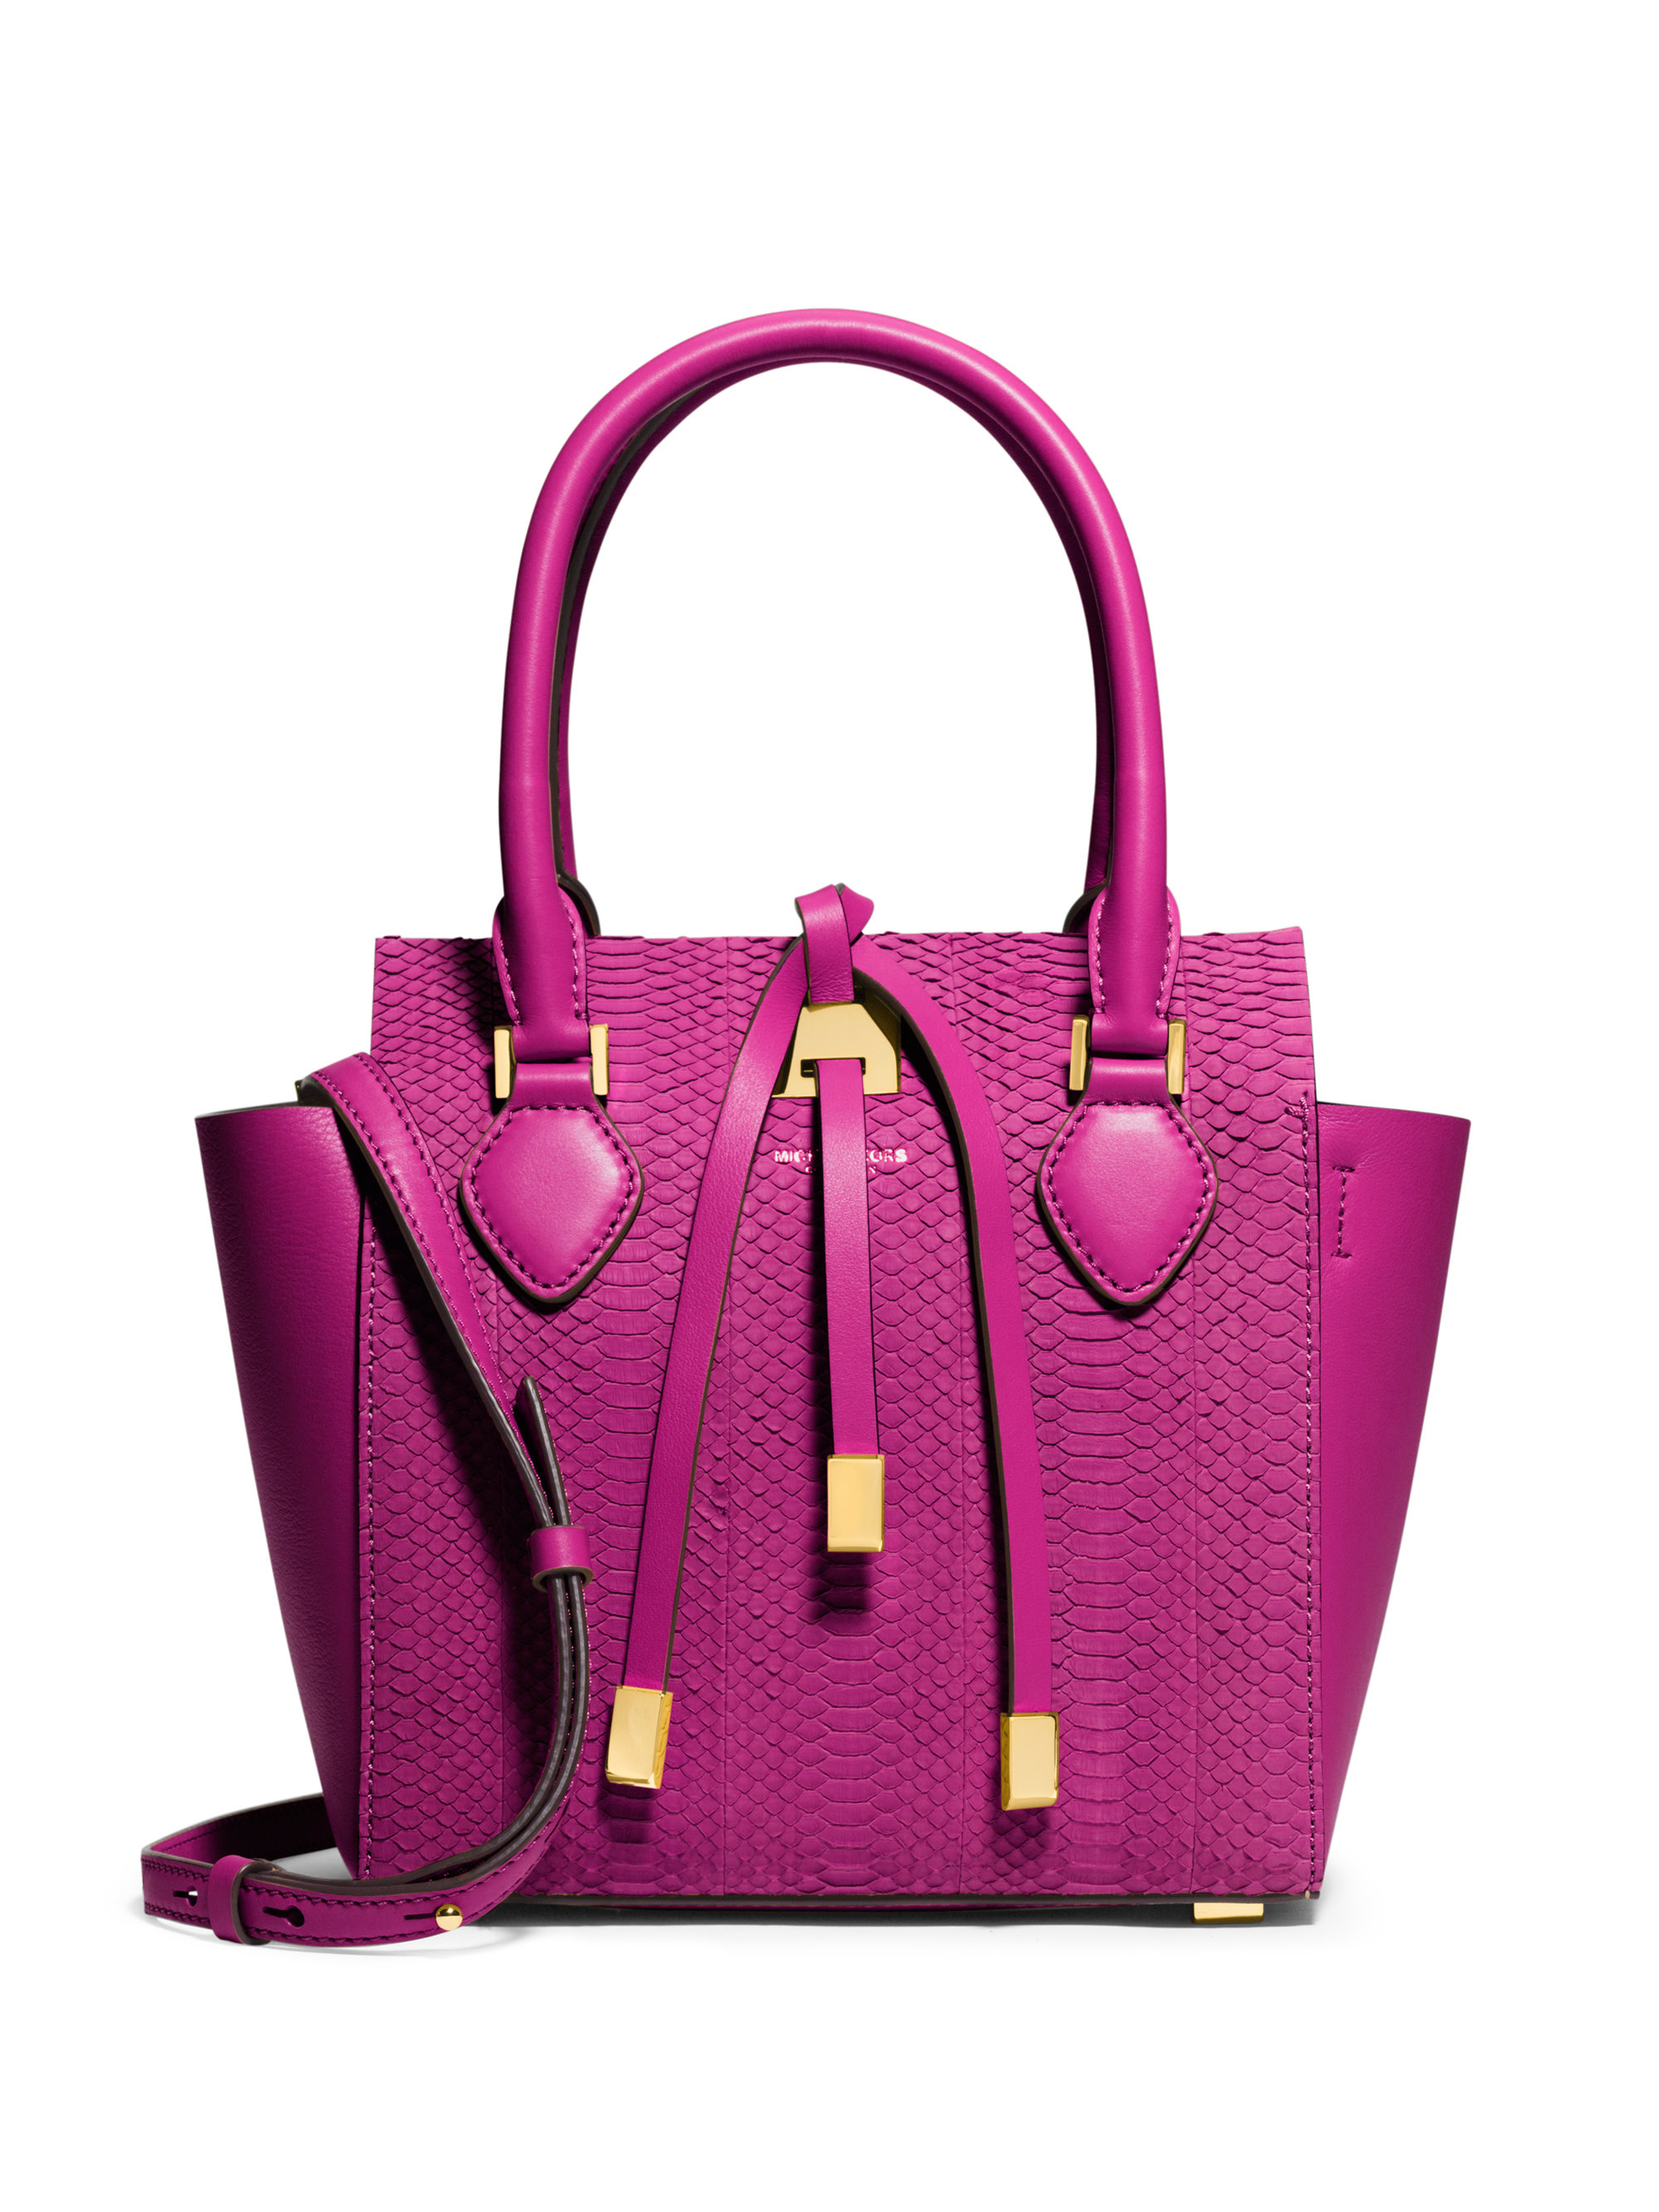 Lyst - Michael Kors Miranda Small Sueded Snakeskin & Leather Tote in Pink